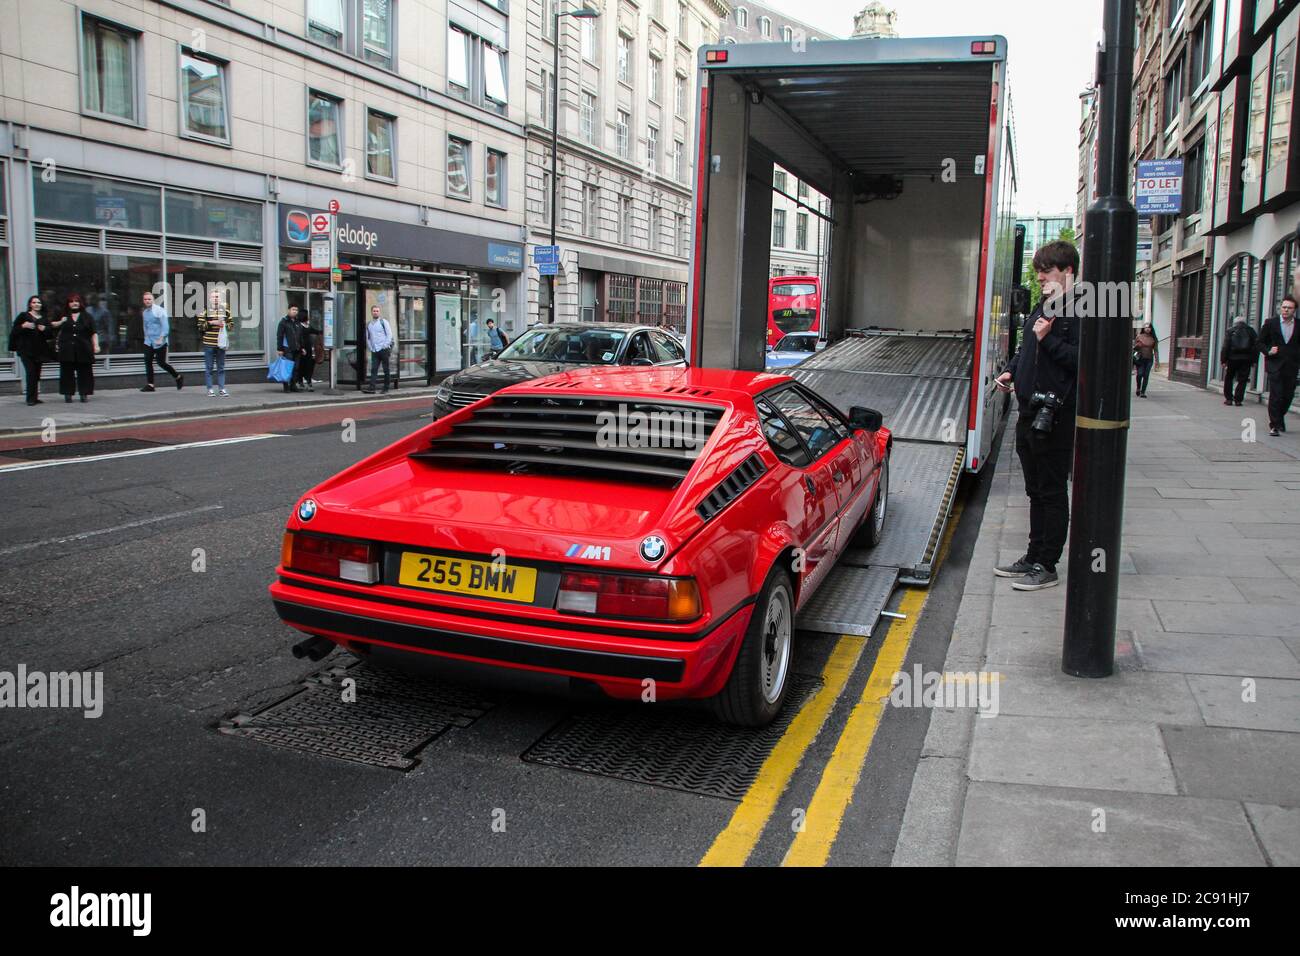 Red BMW M1 classic supercar leaving annual automotive concours of elegance event held in Central London. Stock Photo